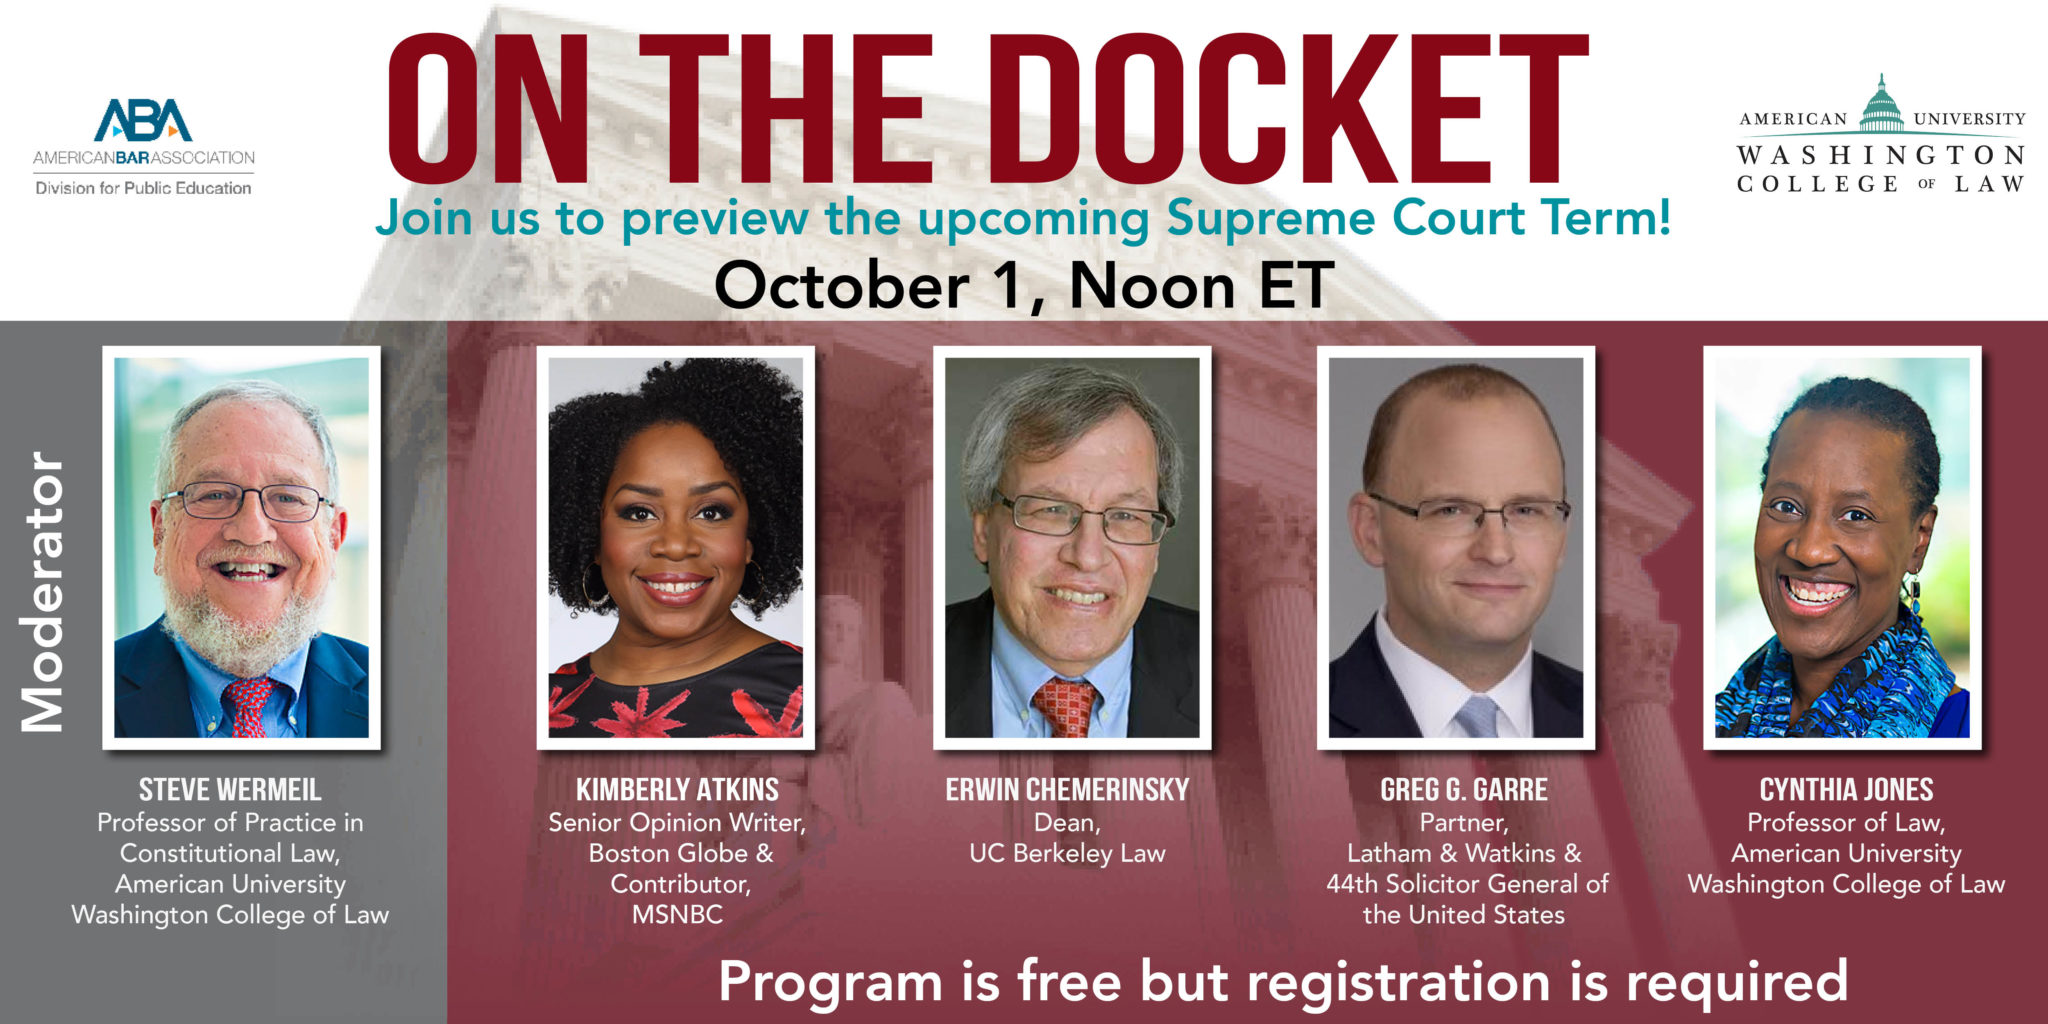 ABA On the Docket: Supreme Court Preview 10/1 Yale Journal on Regulation